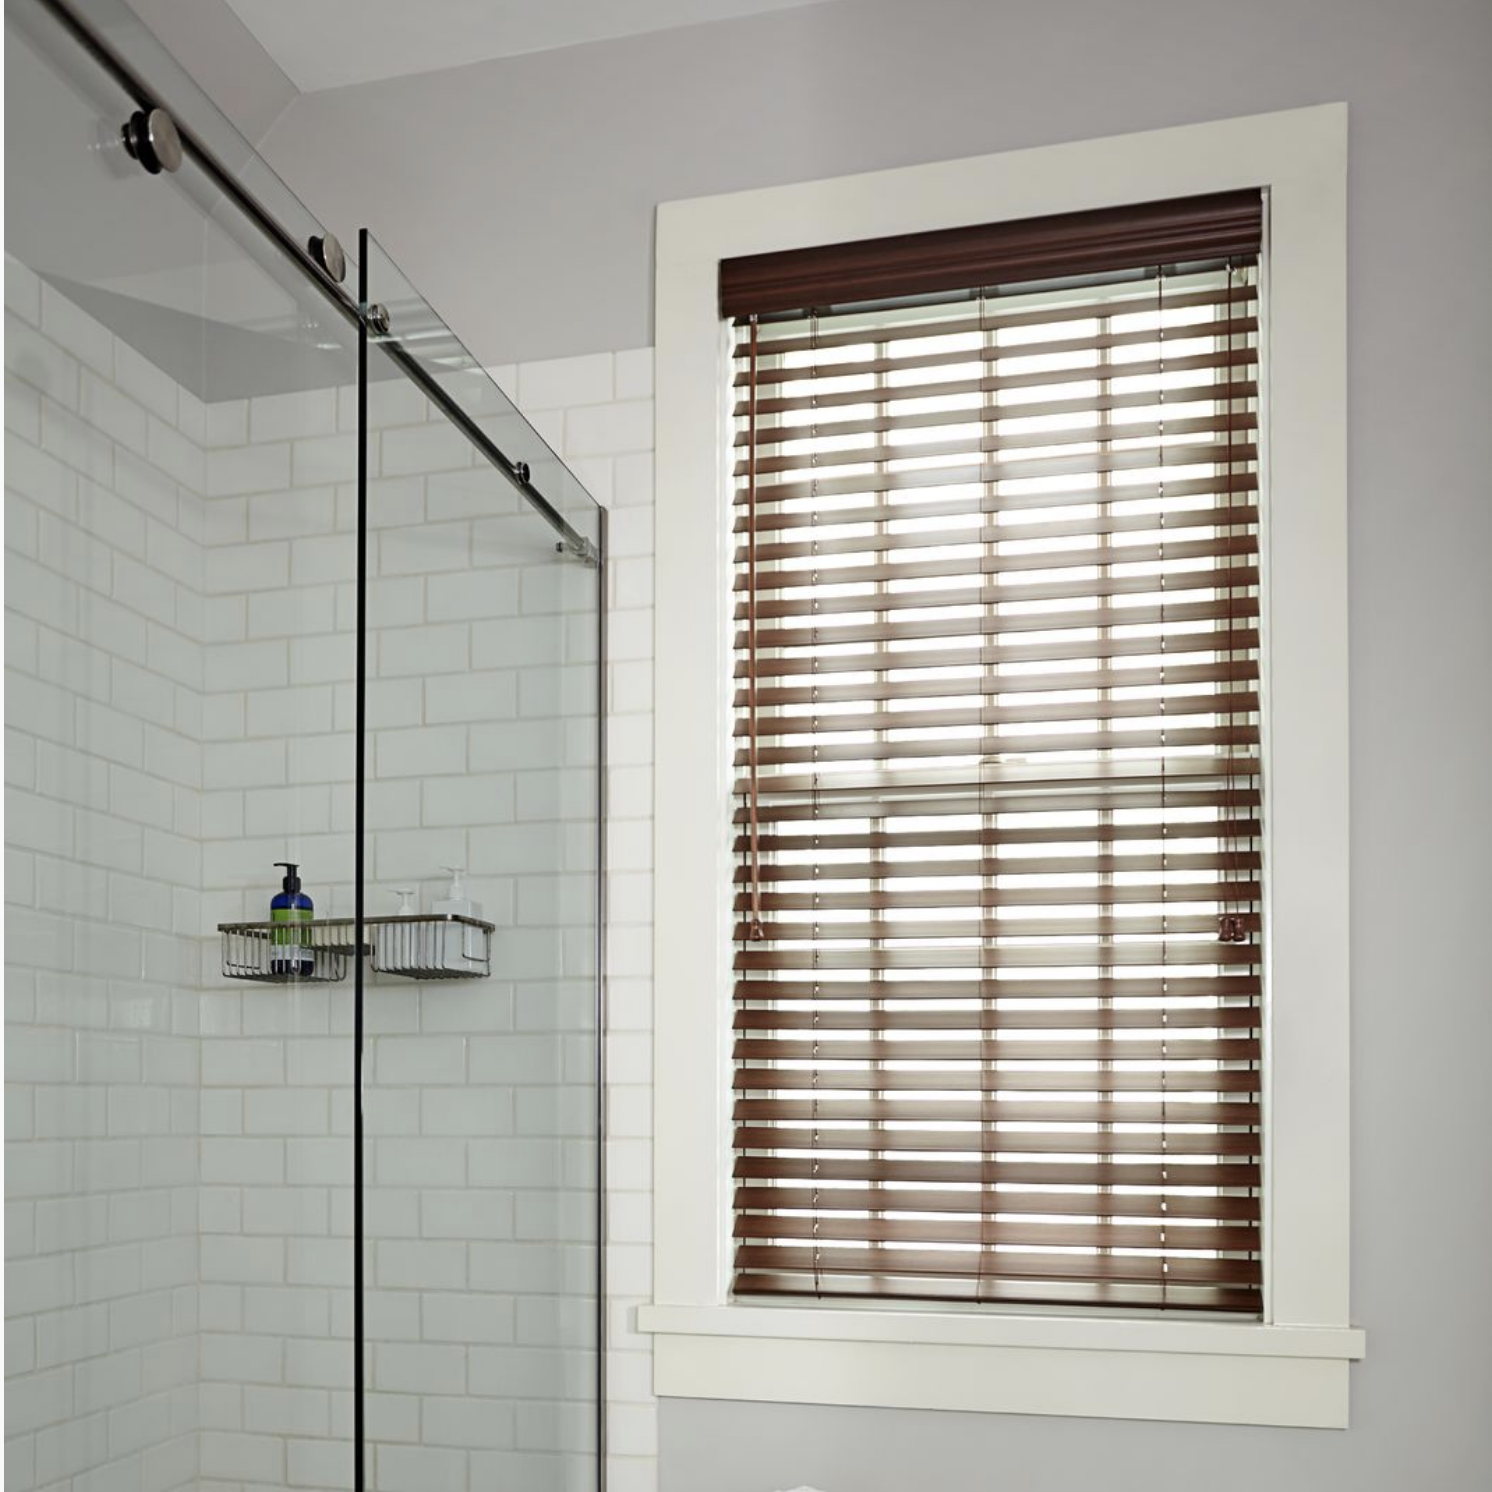 Cordless faux wood blinds in a dark brown wood tone